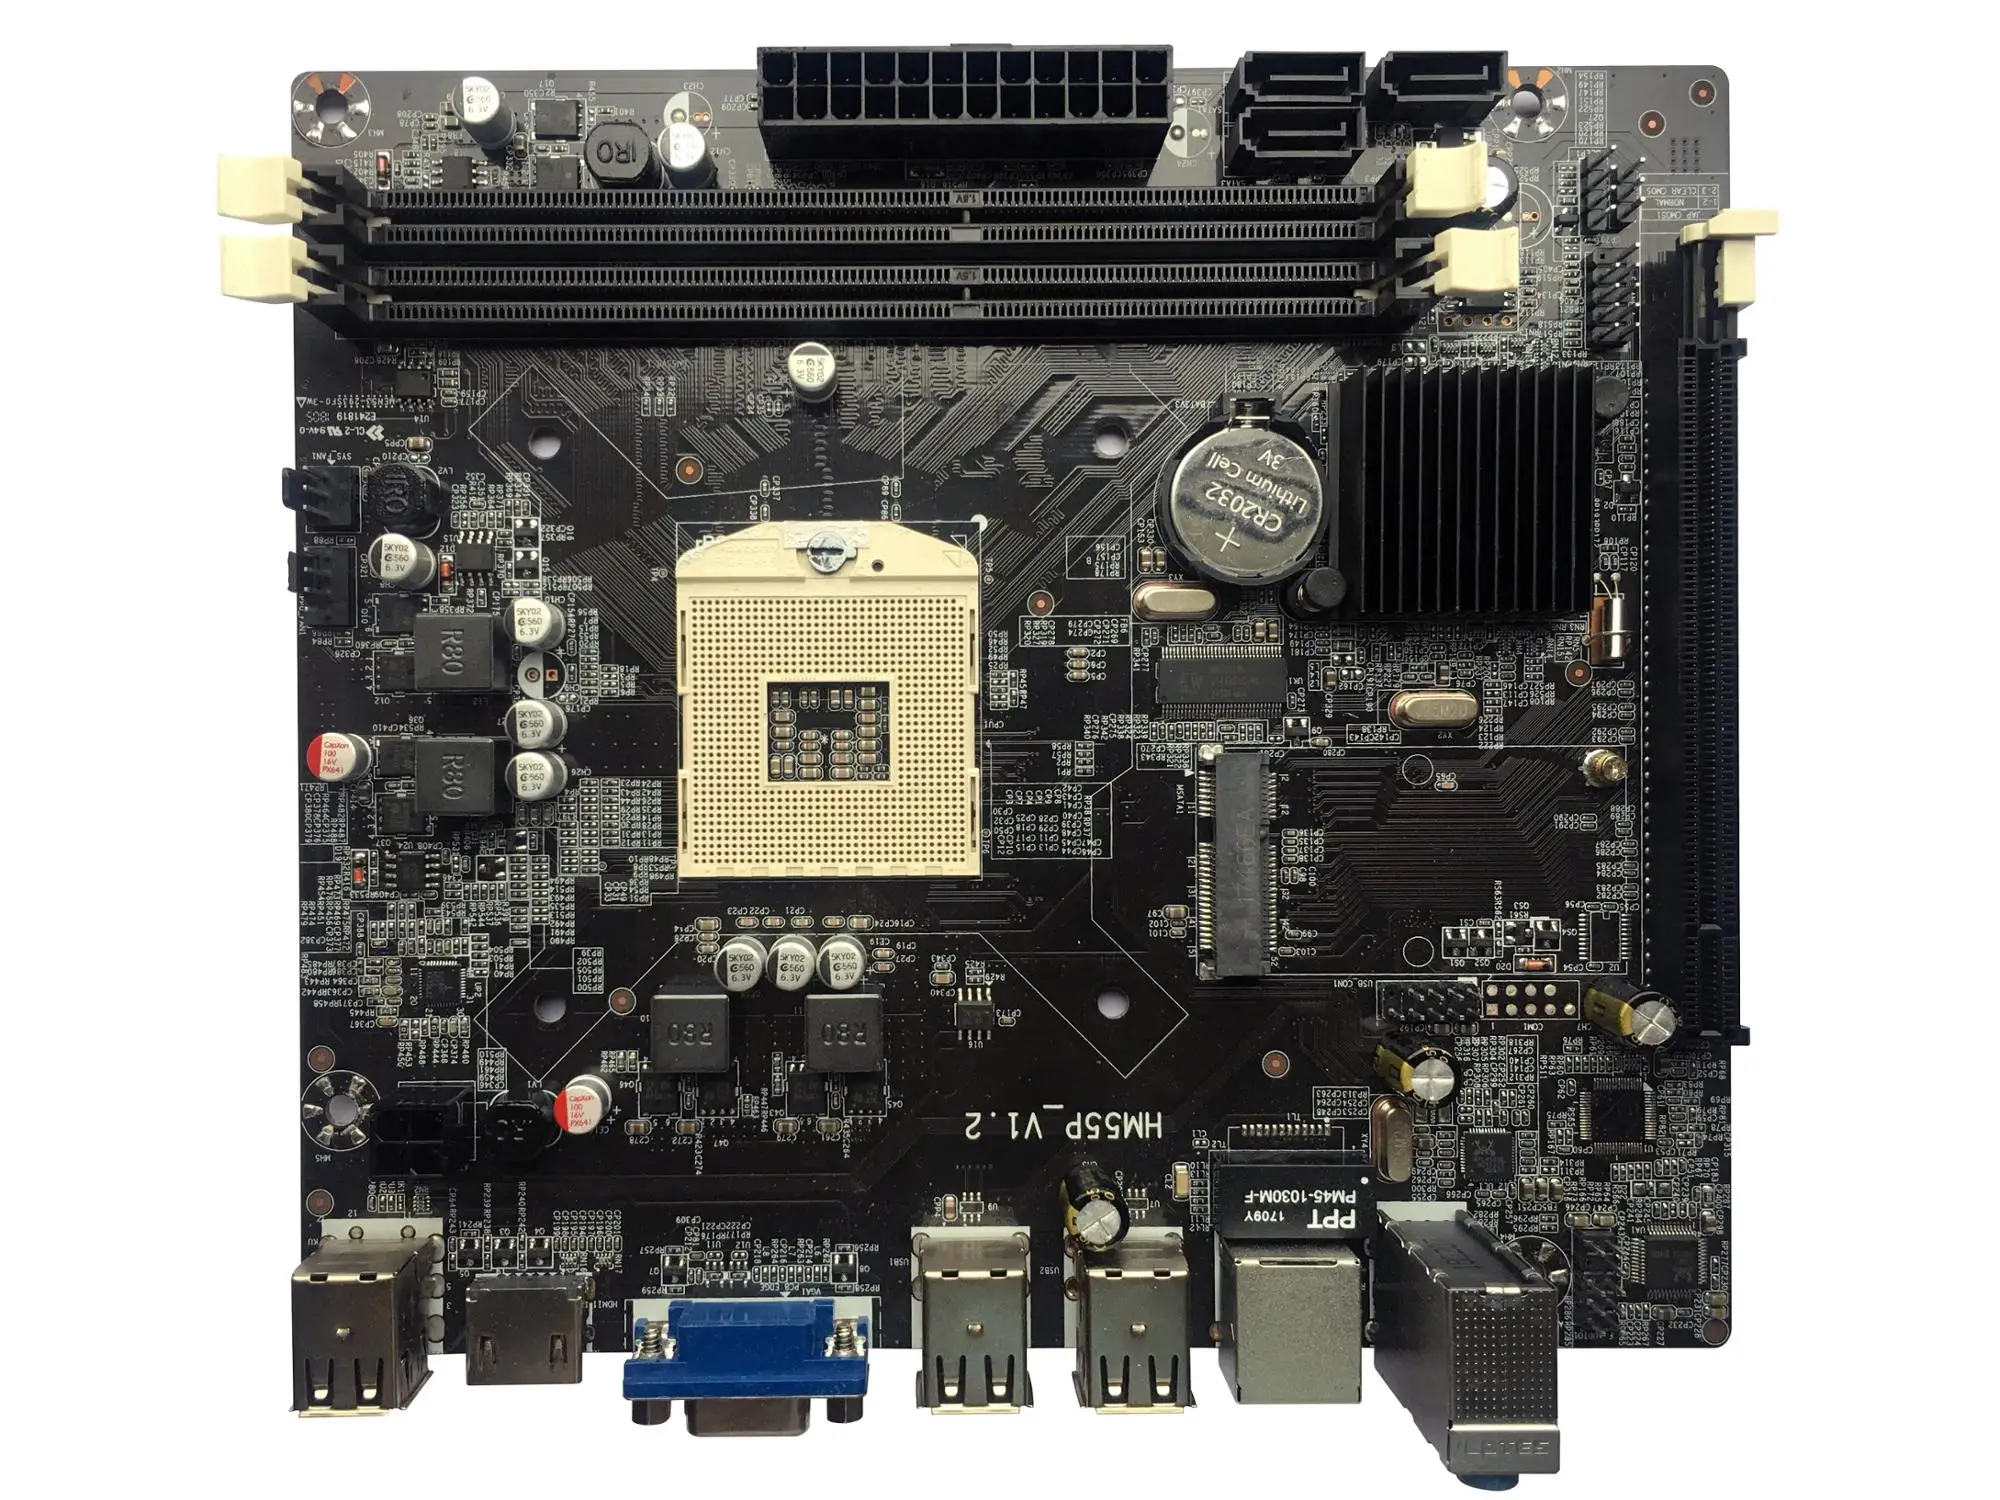 Pga9 Hm55 Motherboard I3 380m I7 6m I7 740m Processor Combo In Micro Atx Size View Hm55 Motherboard Oem Product Details From Shenzhen Hongdafeng Electronics Co Ltd On Alibaba Com